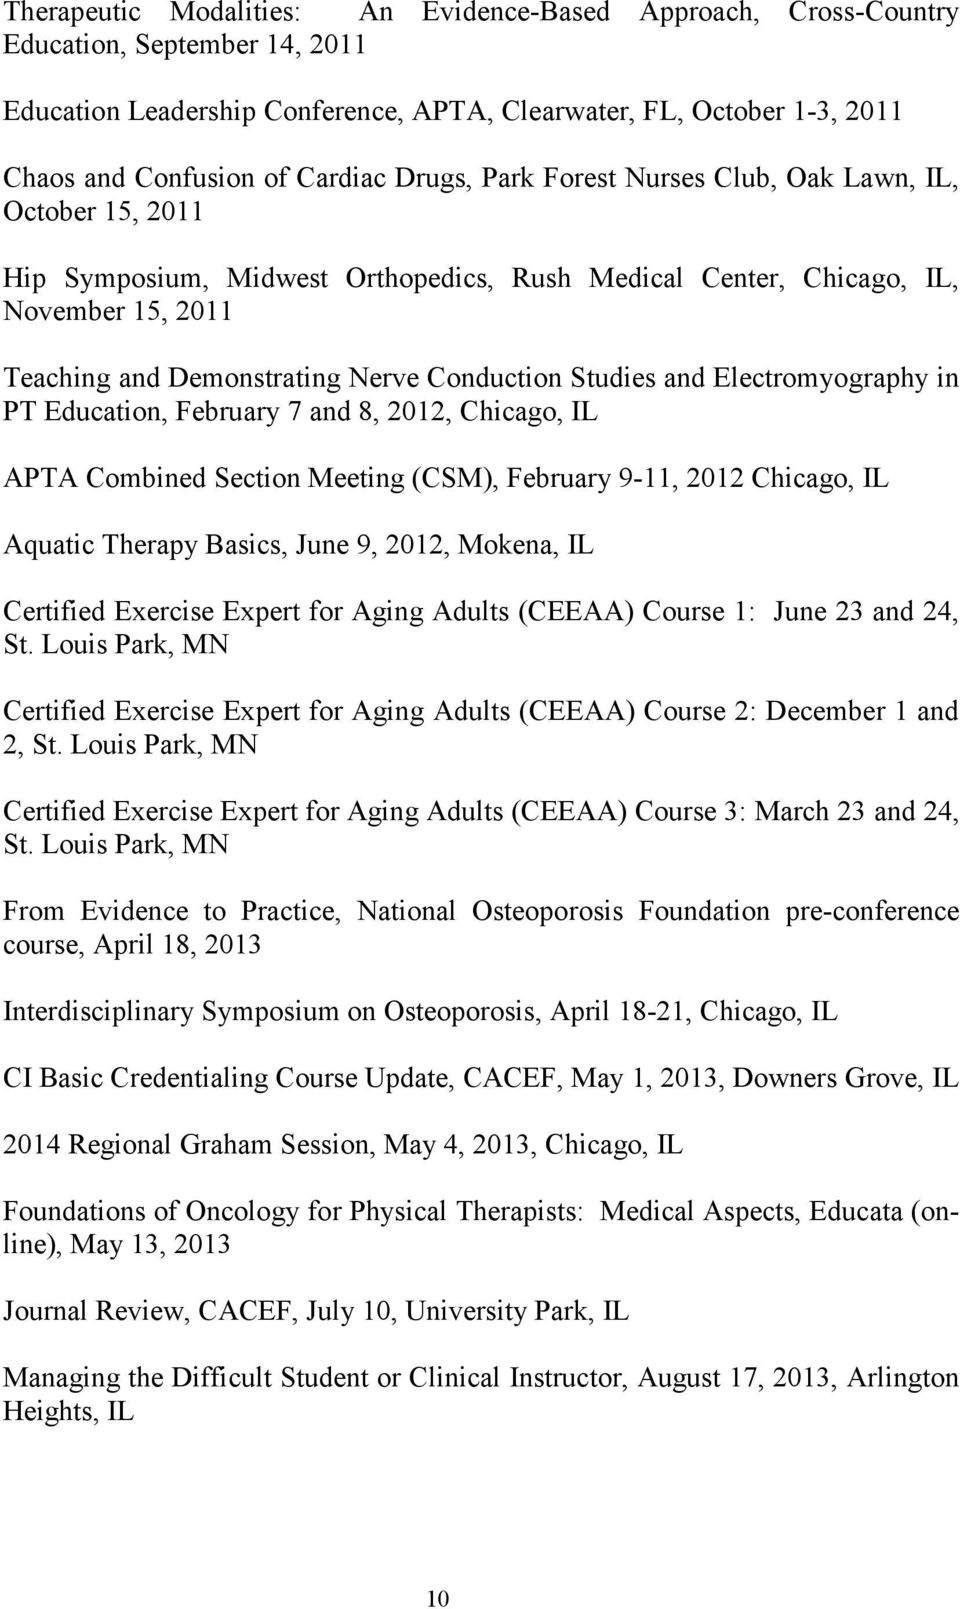 Studies and Electromyography in PT Education, February 7 and 8, 2012, Chicago, IL APTA Combined Section Meeting (CSM), February 9-11, 2012 Chicago, IL Aquatic Therapy Basics, June 9, 2012, Mokena, IL